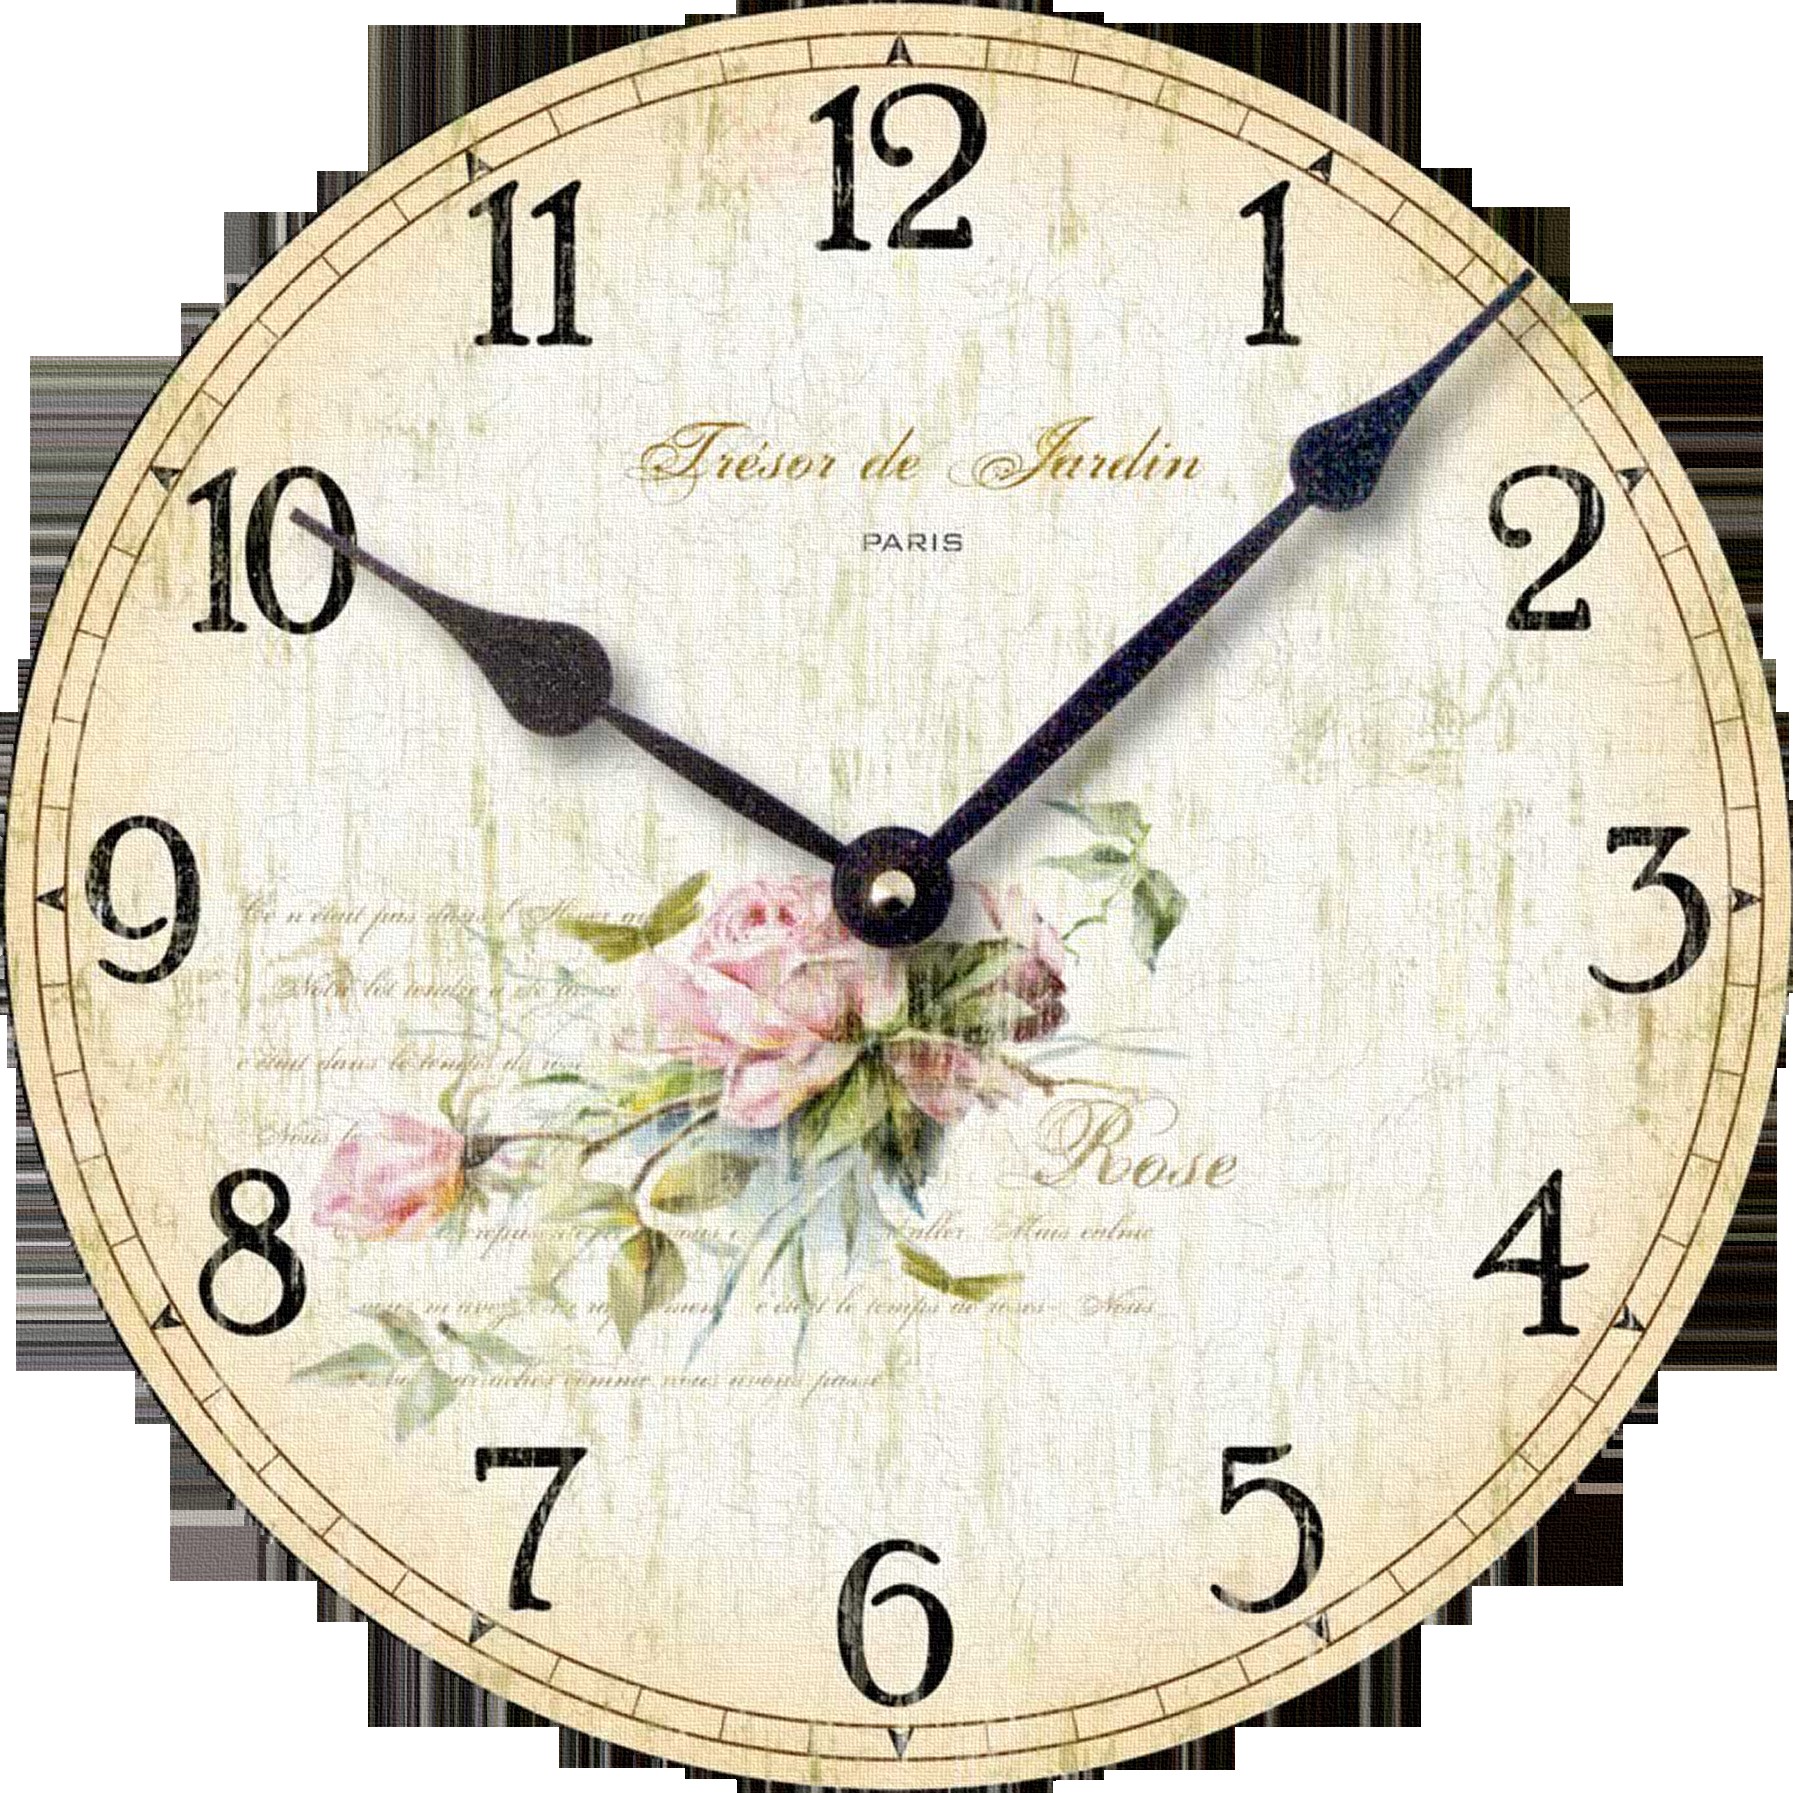 Vintage Rustic Wooden Wall Clock Home Antique Shabby Chic Retro Kitchen Decor HG 